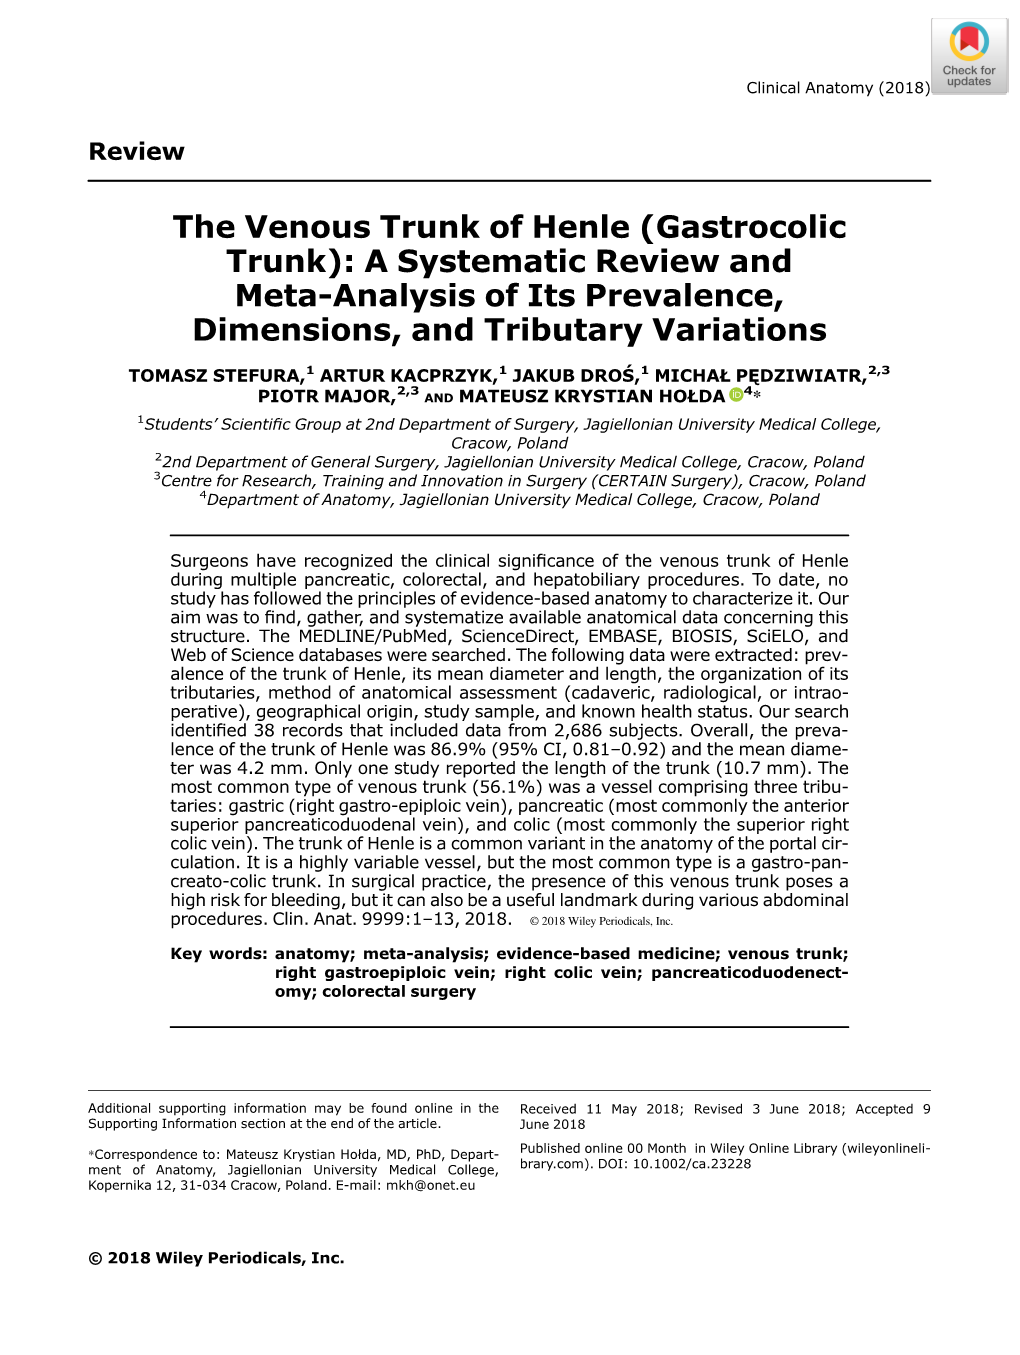 The Venous Trunk of Henle (Gastrocolic Trunk): a Systematic Review and Meta-Analysis of Its Prevalence, Dimensions, and Tributary Variations